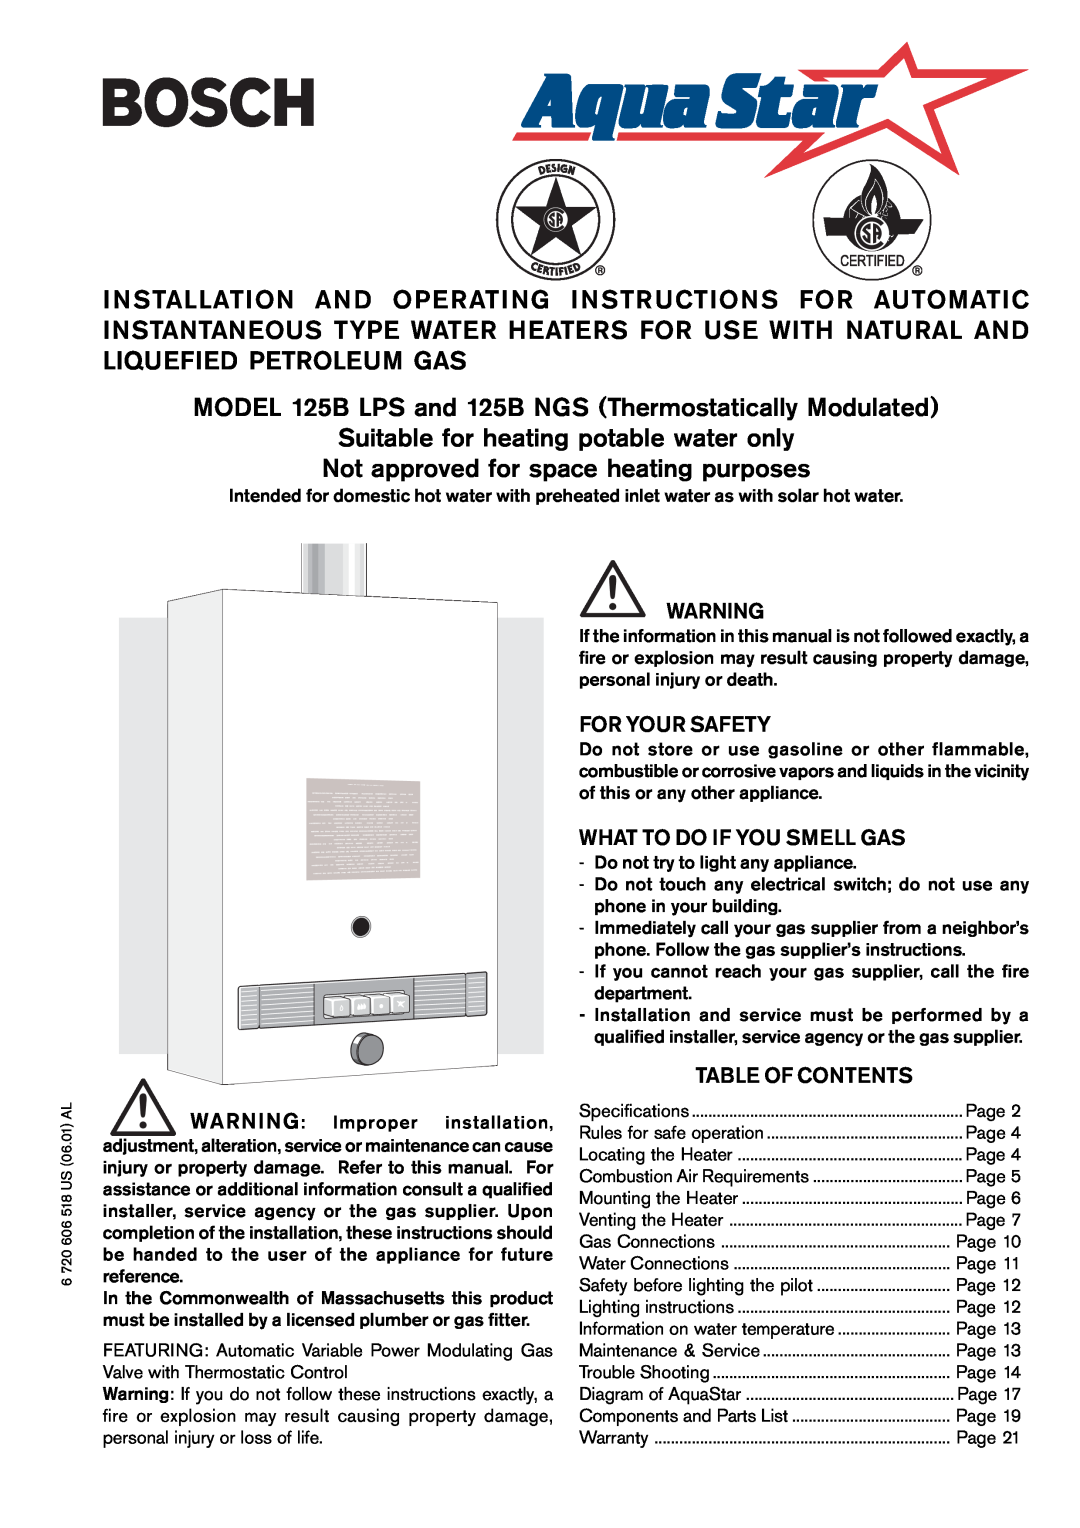 AquaStar specifications MODEL 125B LPS and 125B NGS Thermostatically Modulated 